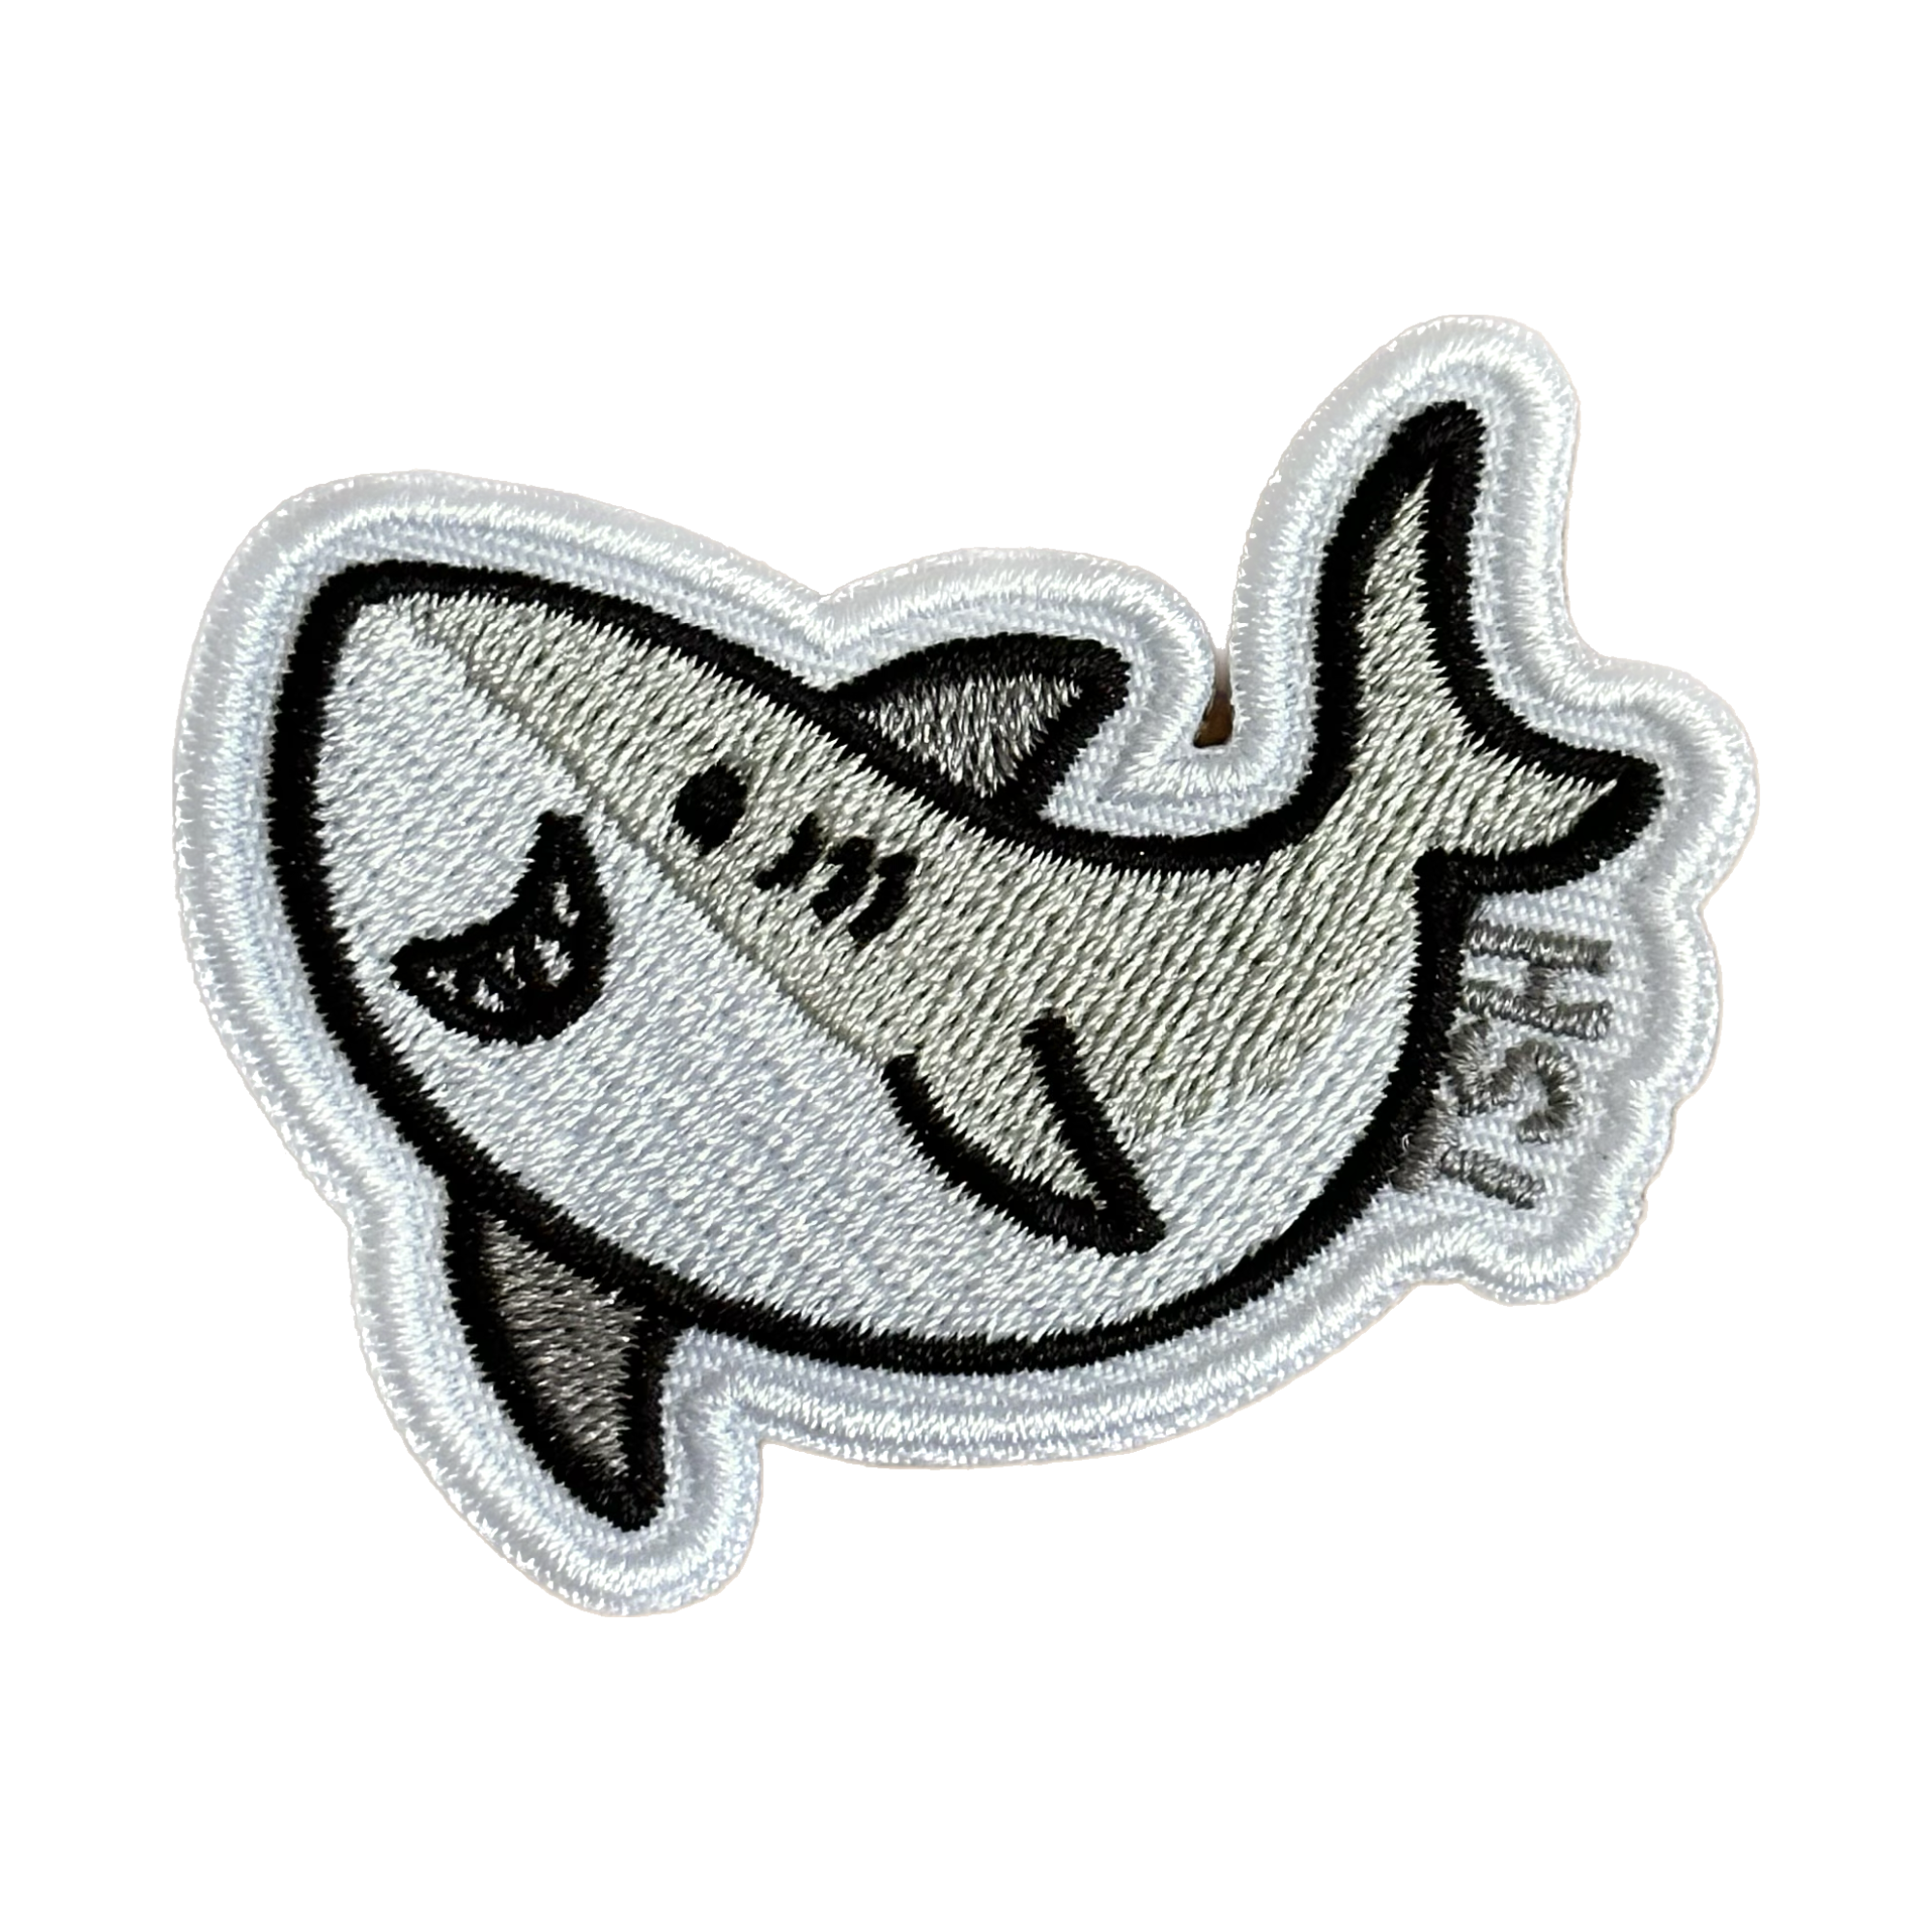 Electric Shark Patch 506 2 Inch Diameter Embroidered Patch 